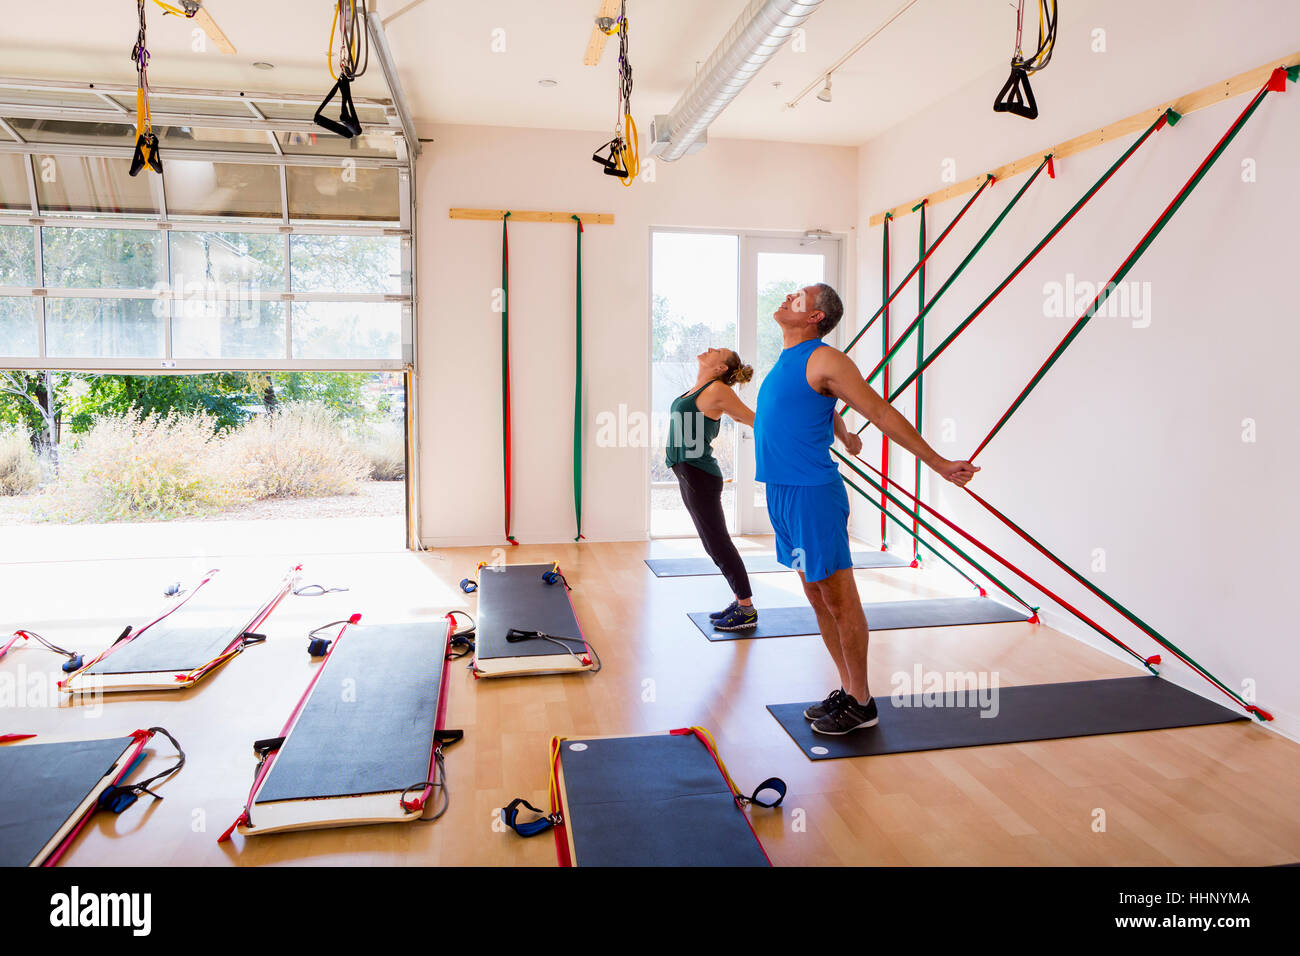 People using resistance bands in gymnasium Stock Photo